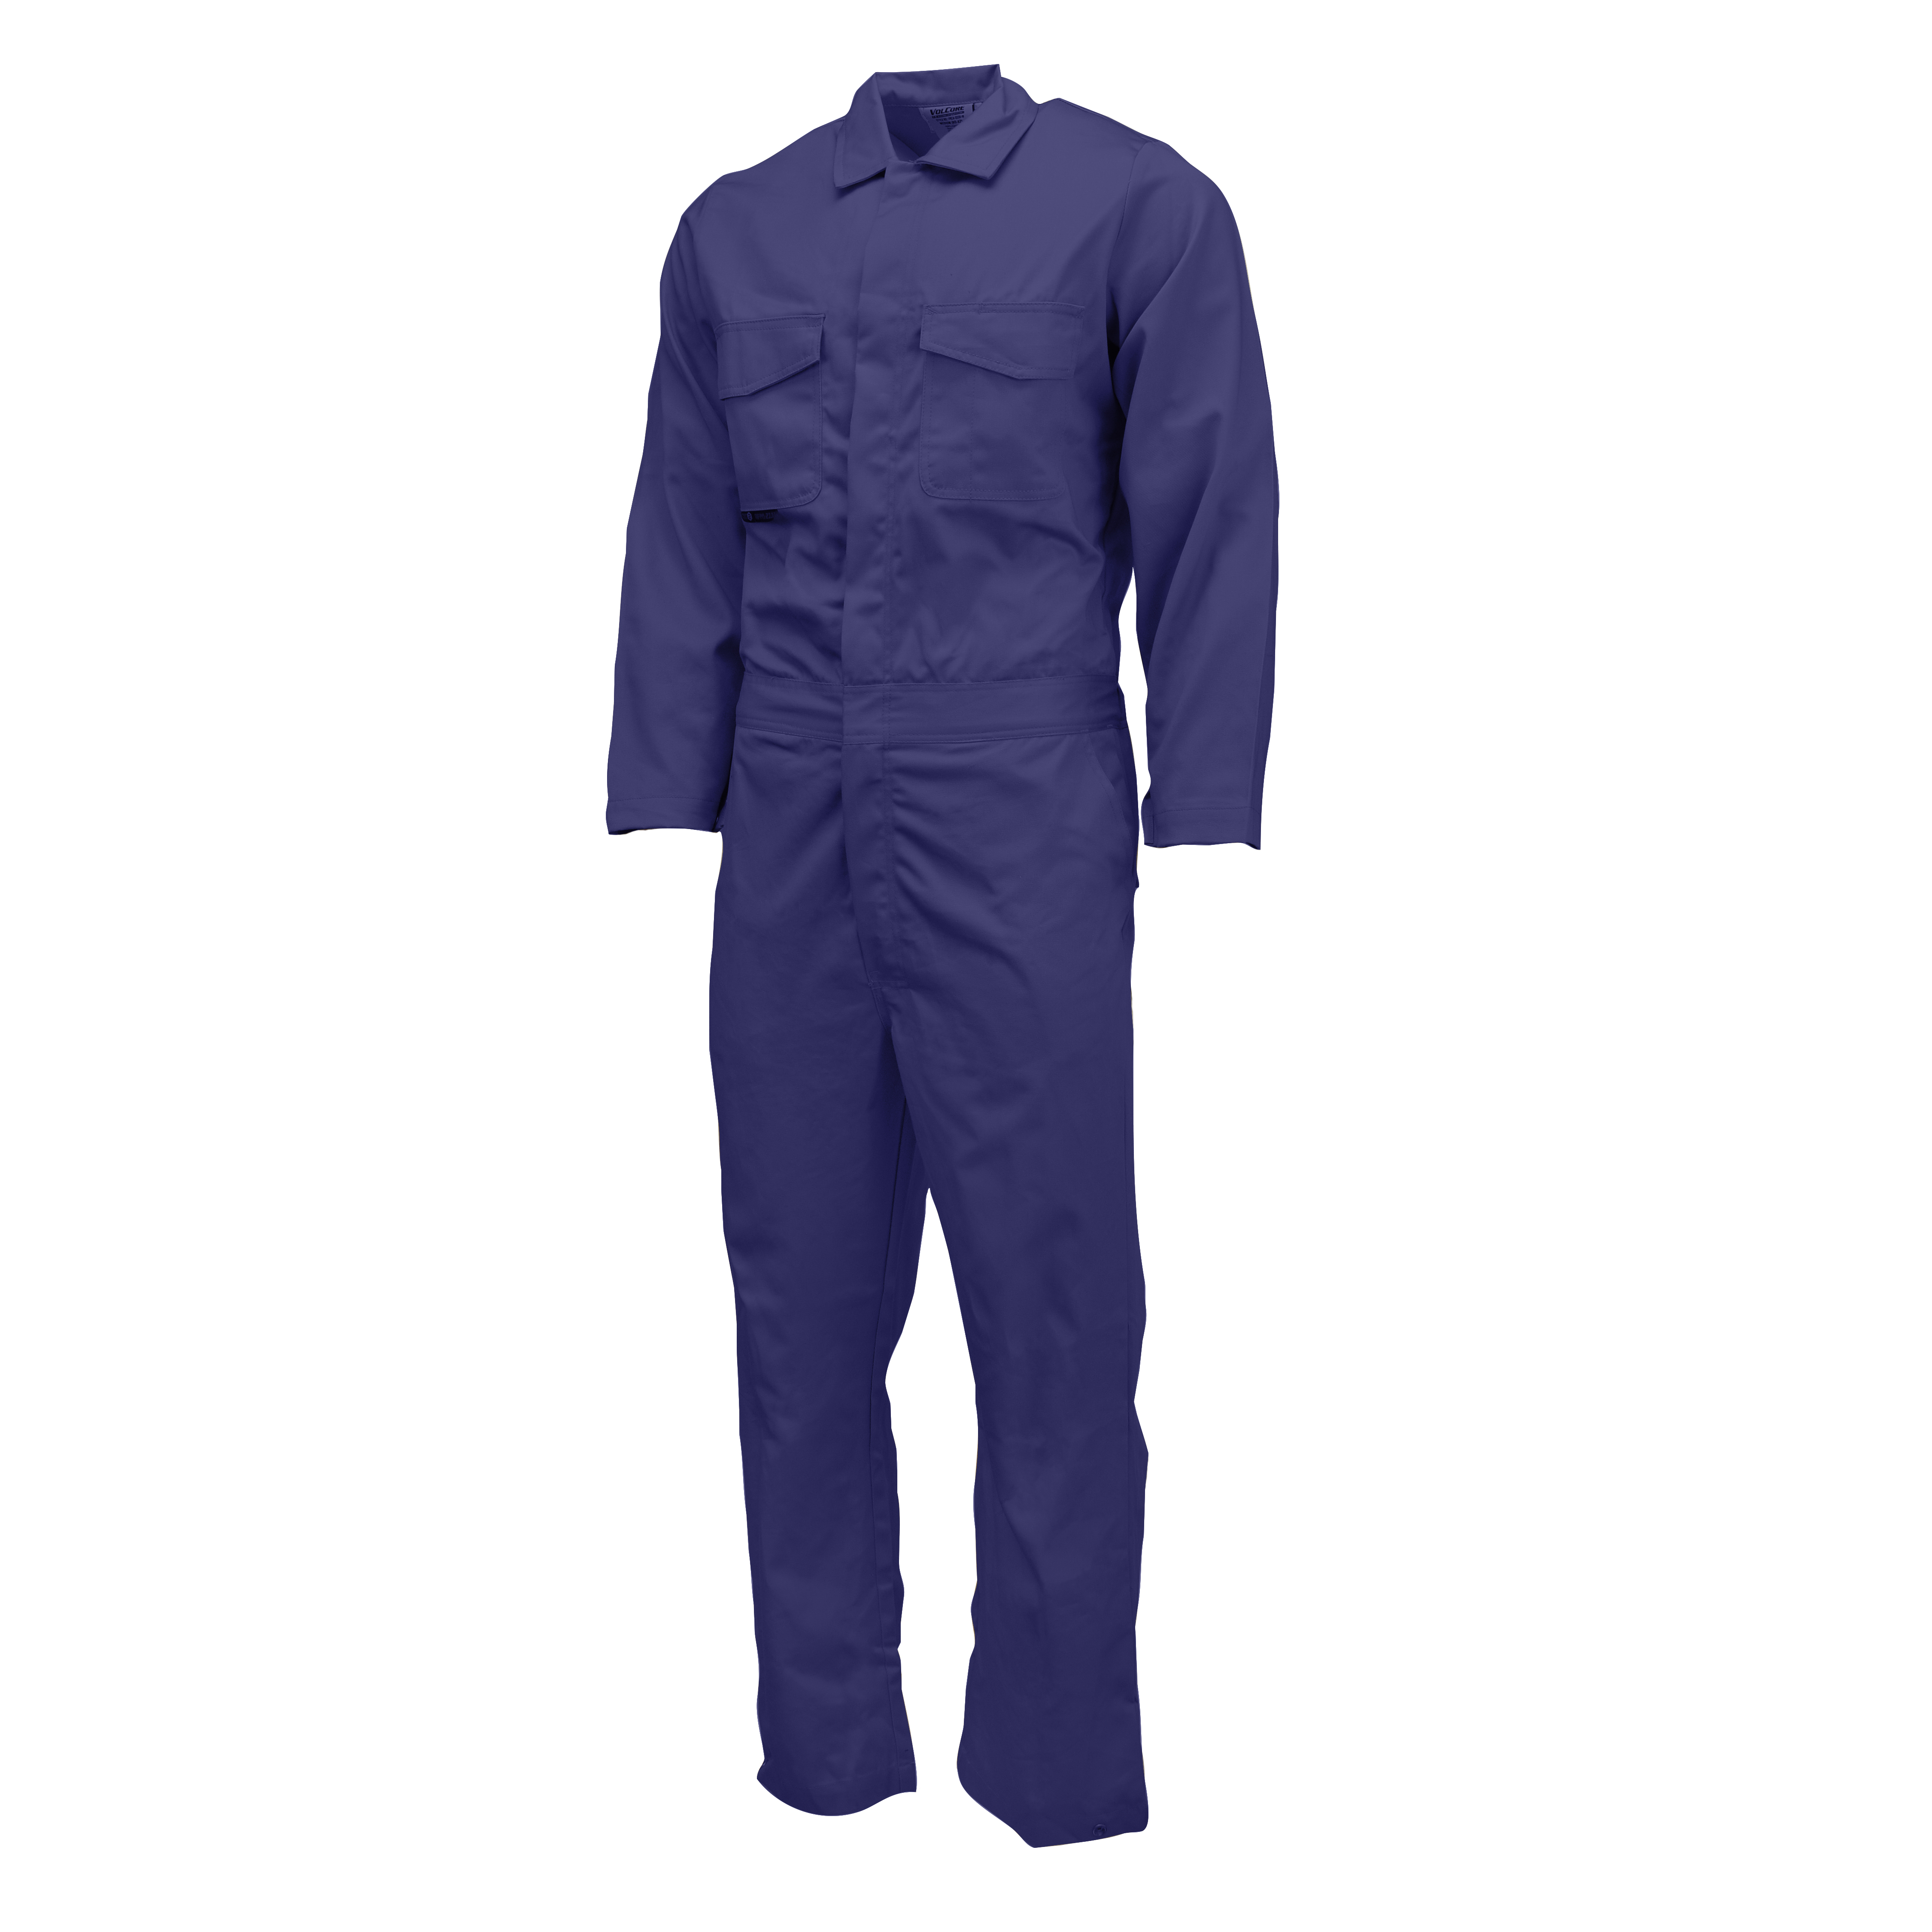 FRCA-003 VolCore™ Cotton FR Coverall - Navy - Size 6XT